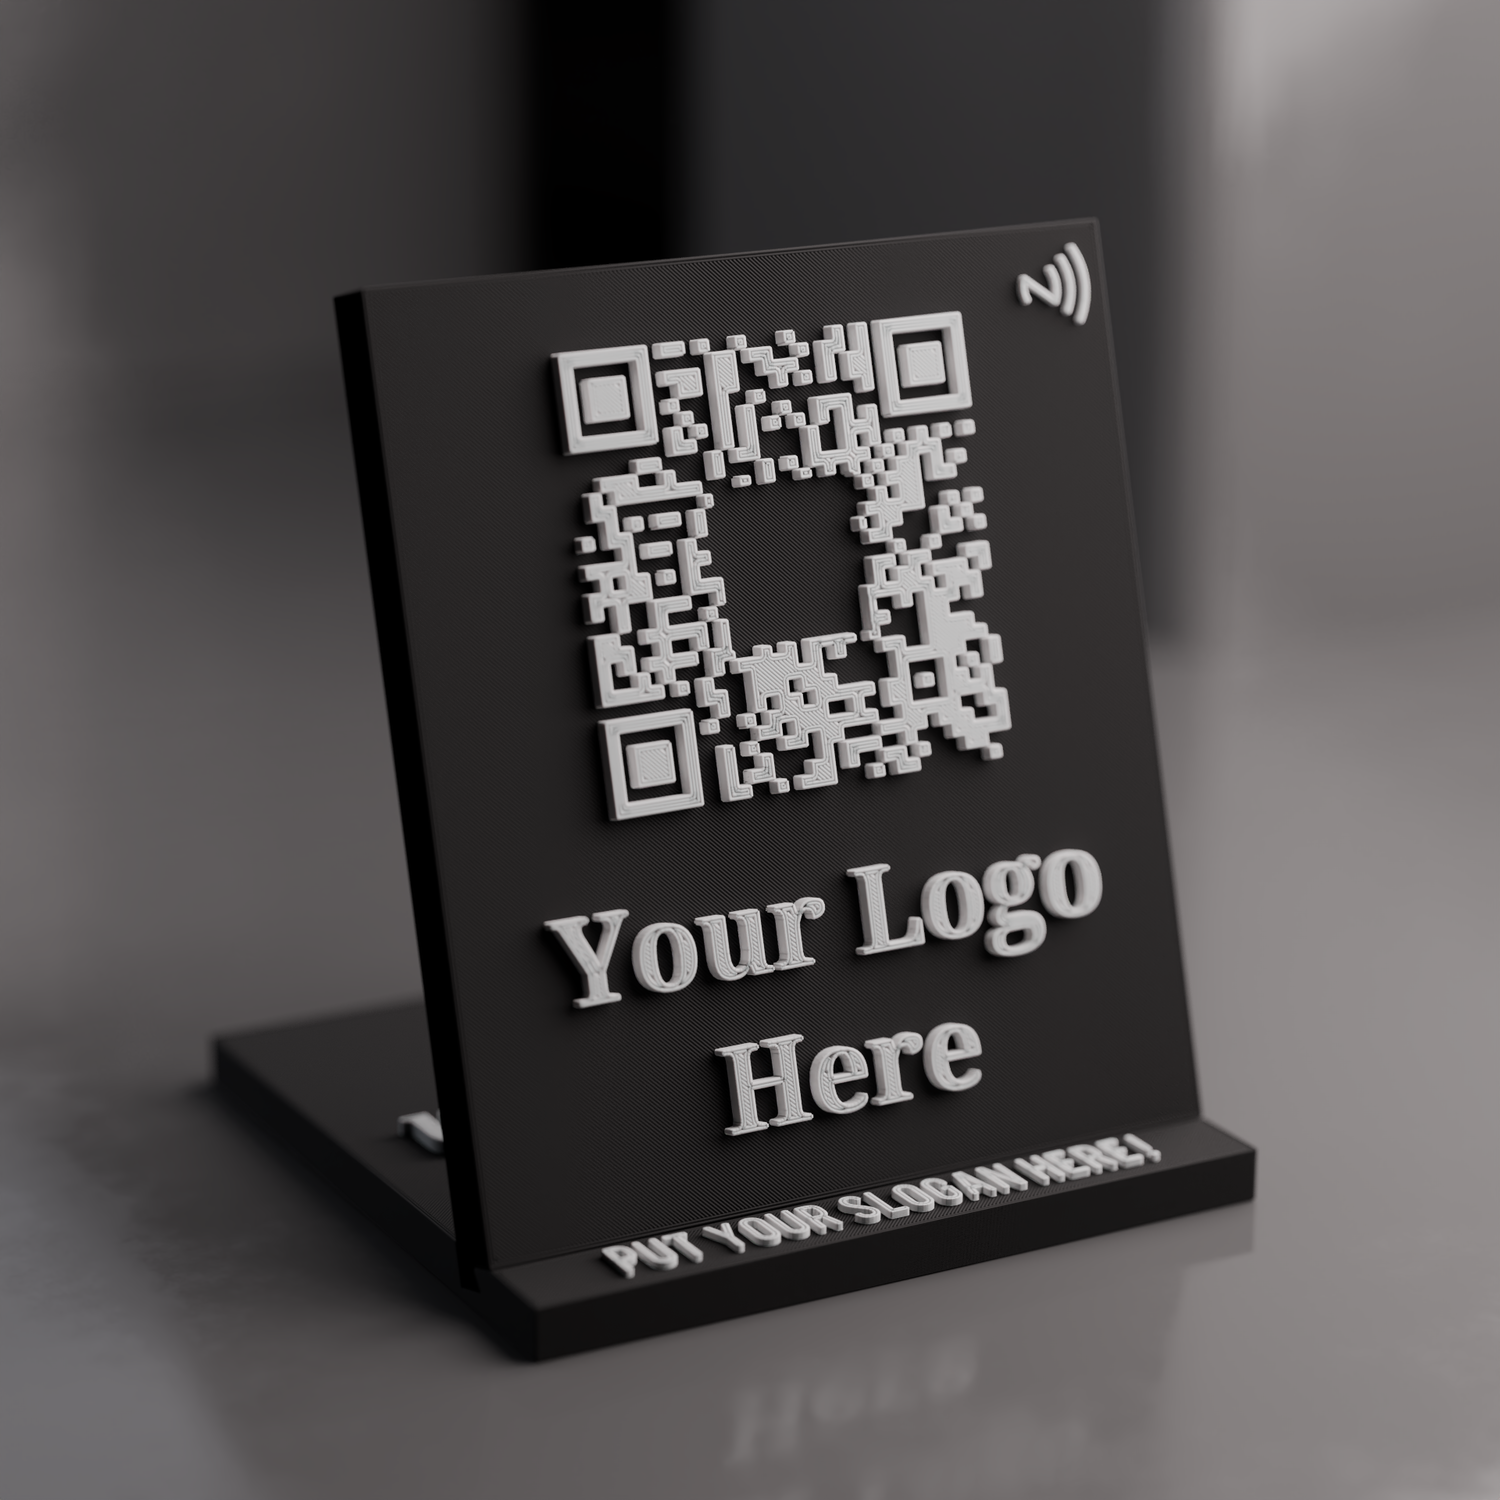 Our classic black stand, add your logo and slogan to customize this qr stand to your business